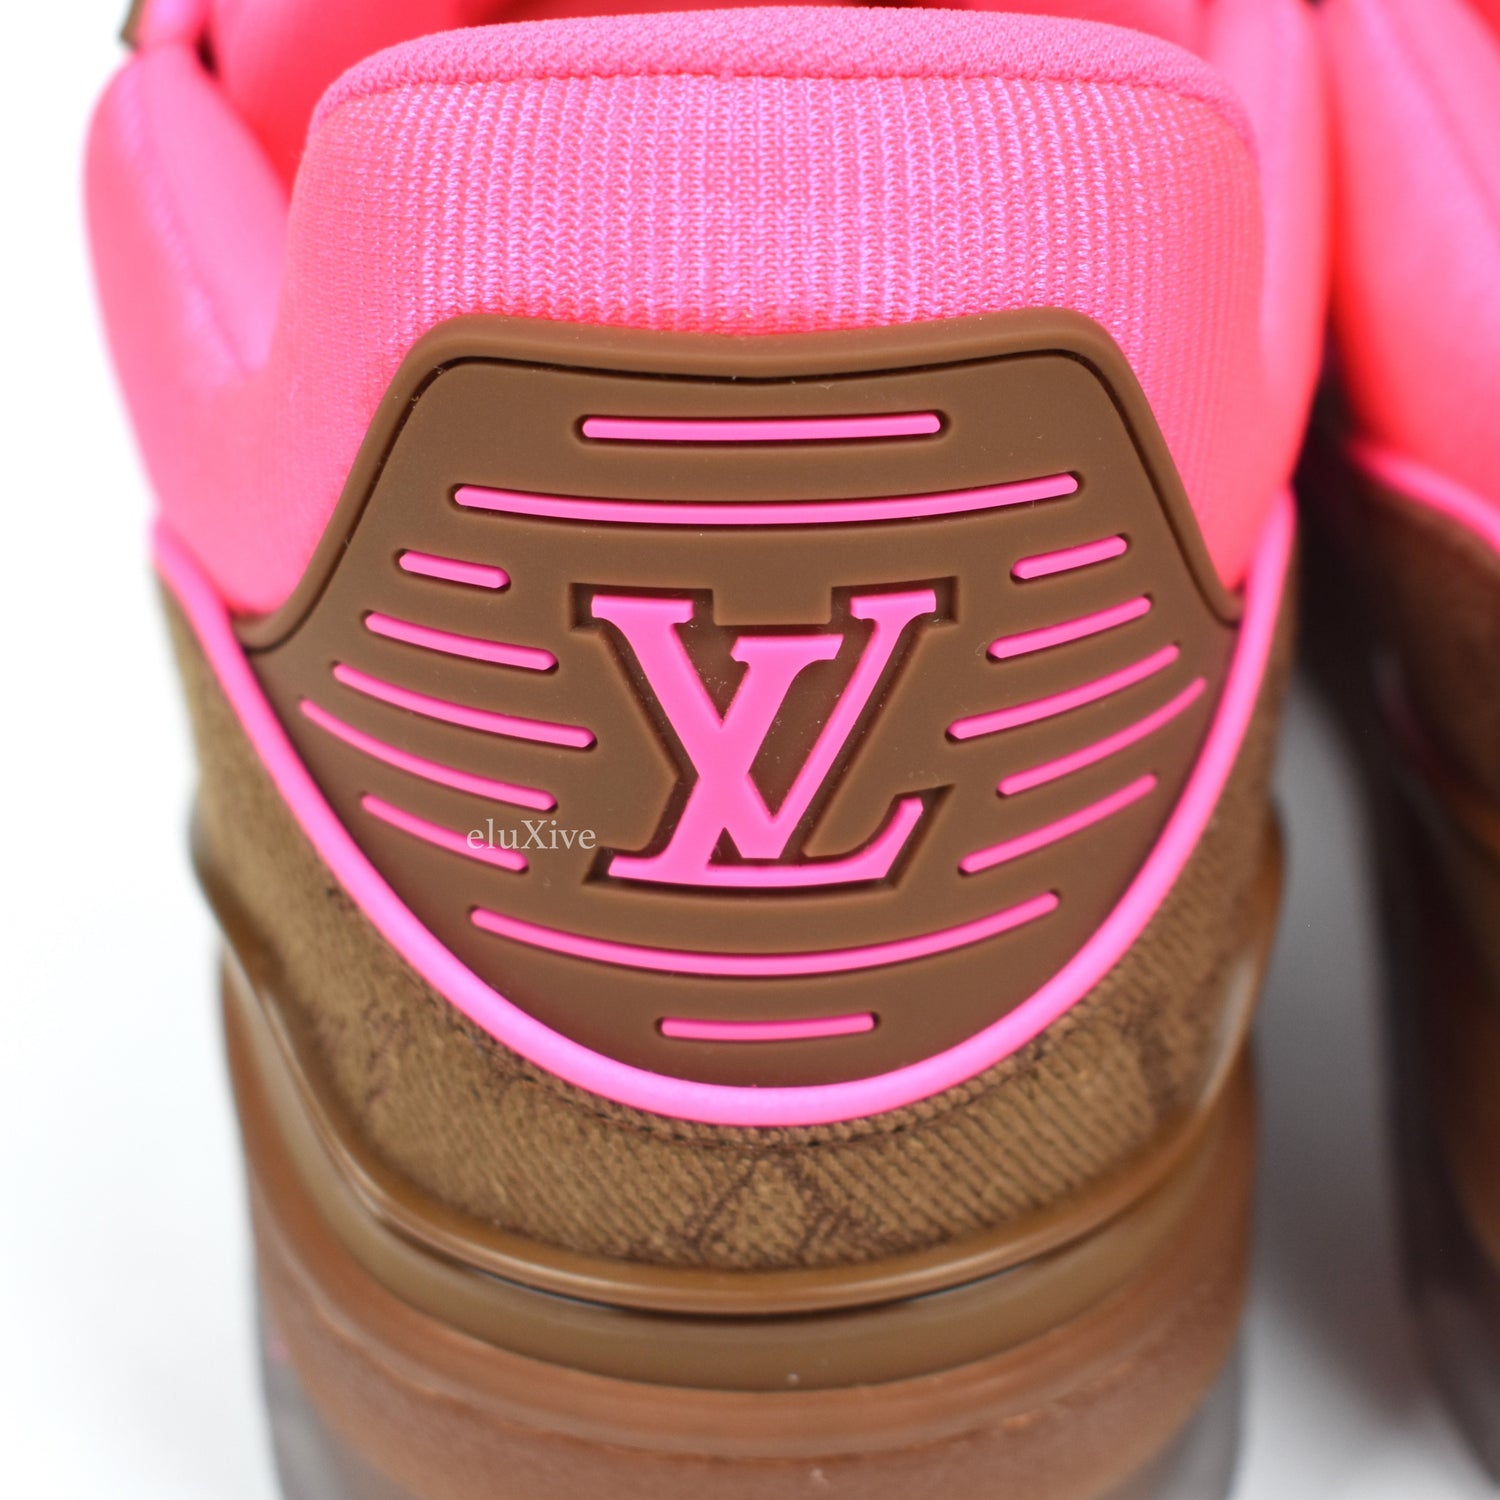 louis vuitton shoes trainer pink and brown｜TikTok Search